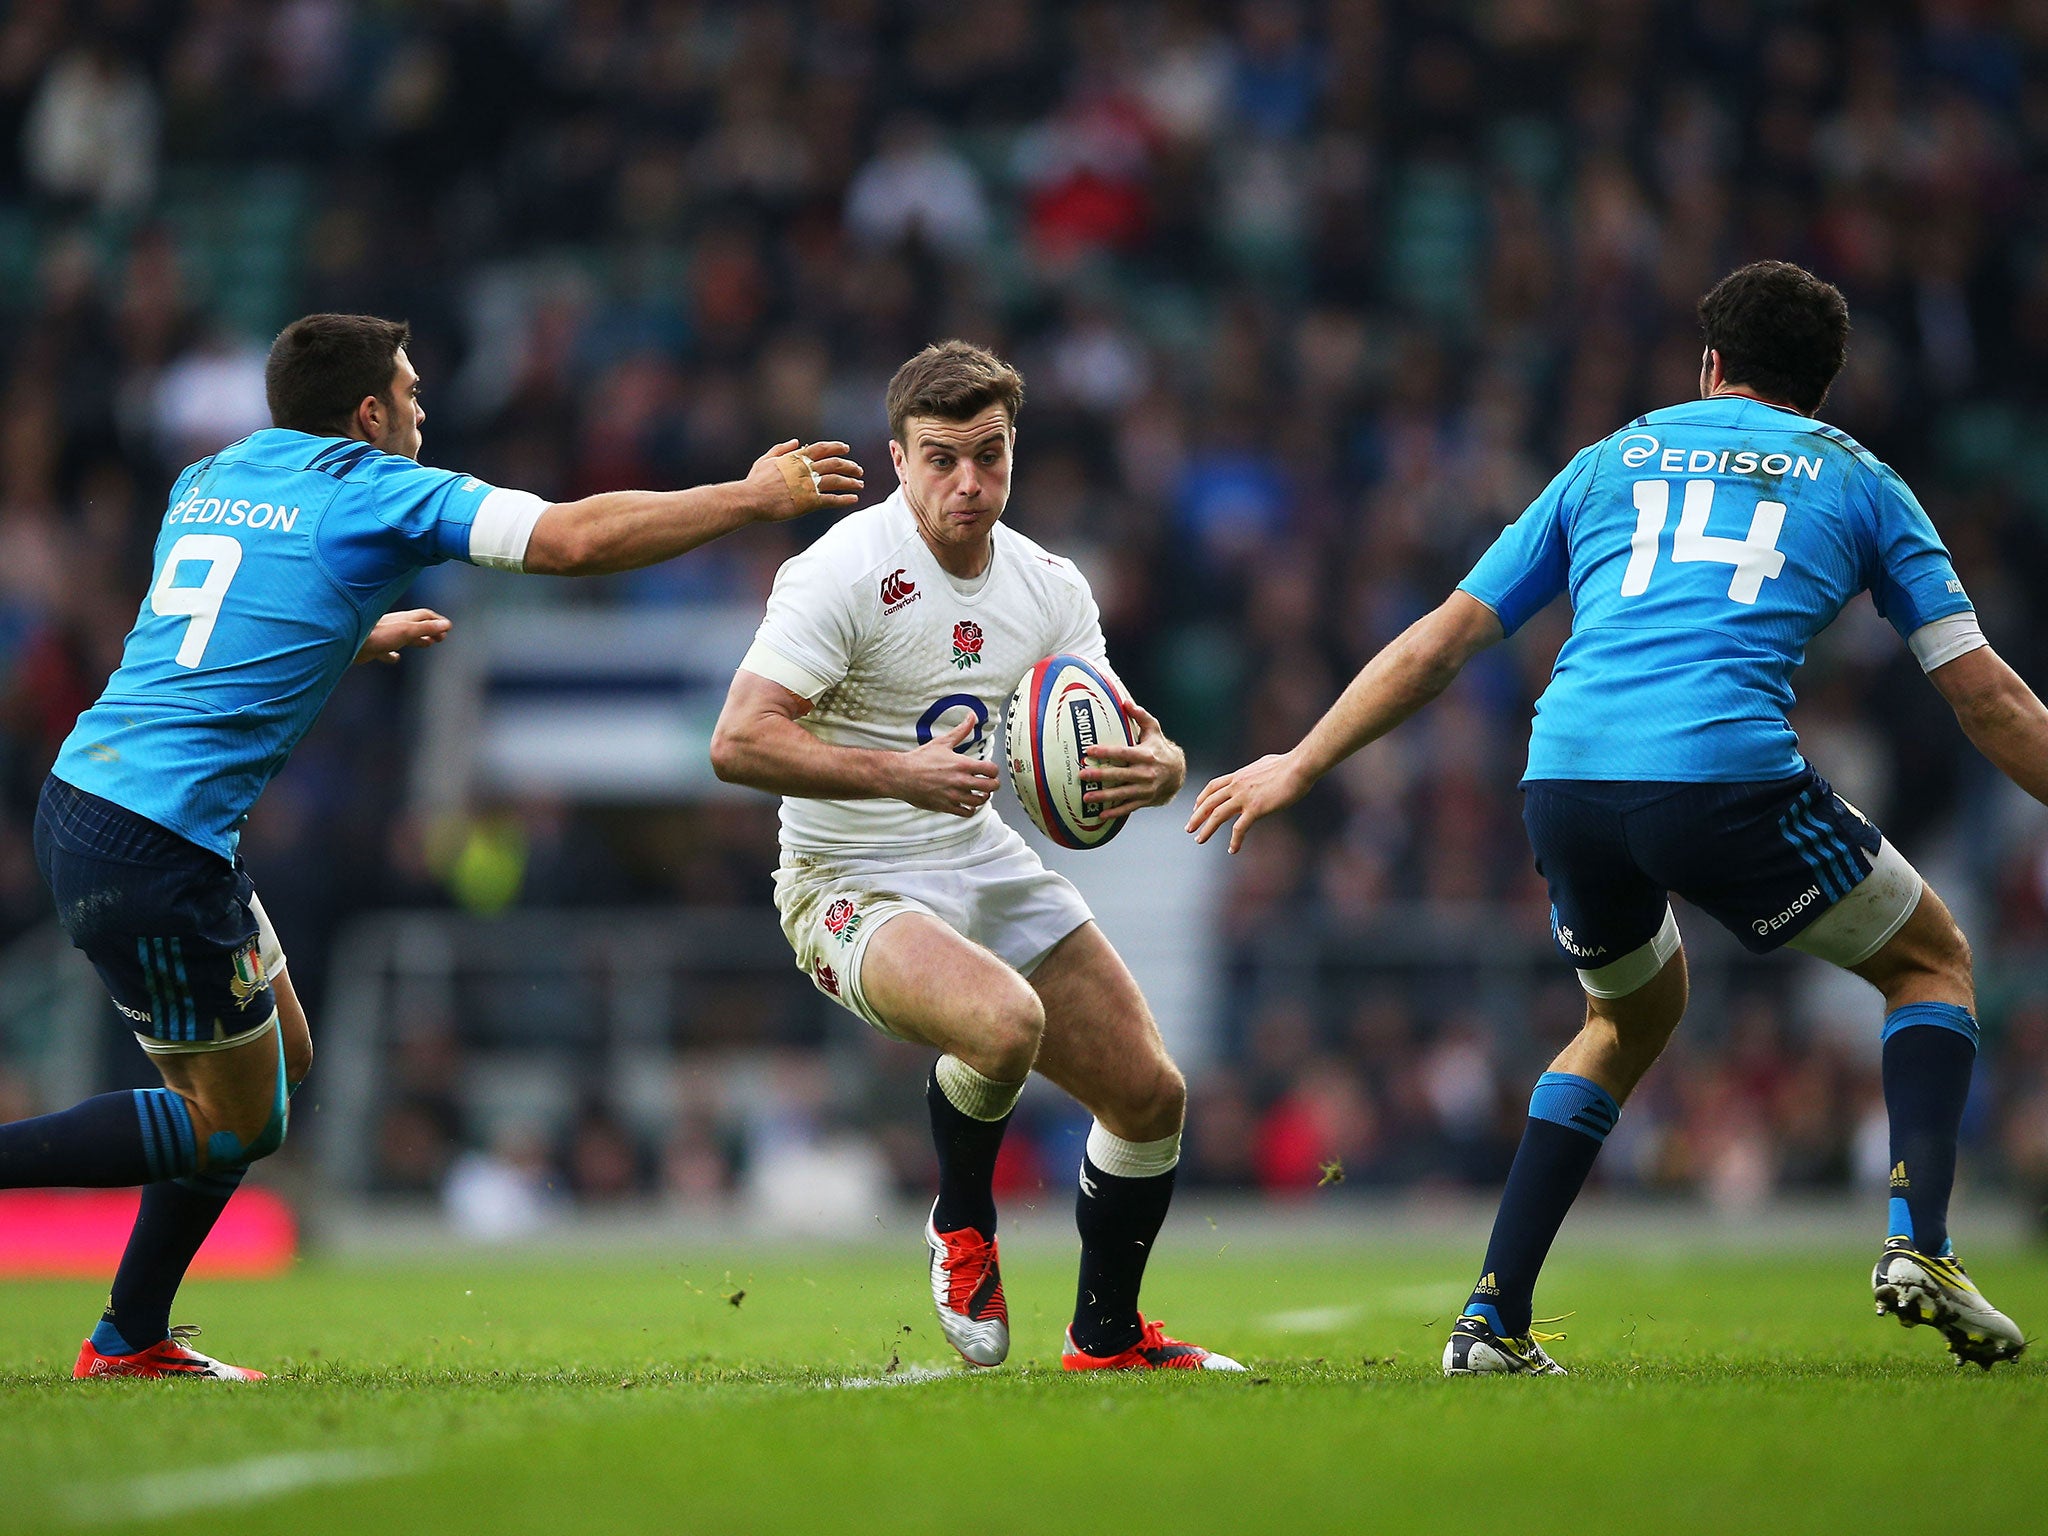 George Ford looks for a gap against Italy